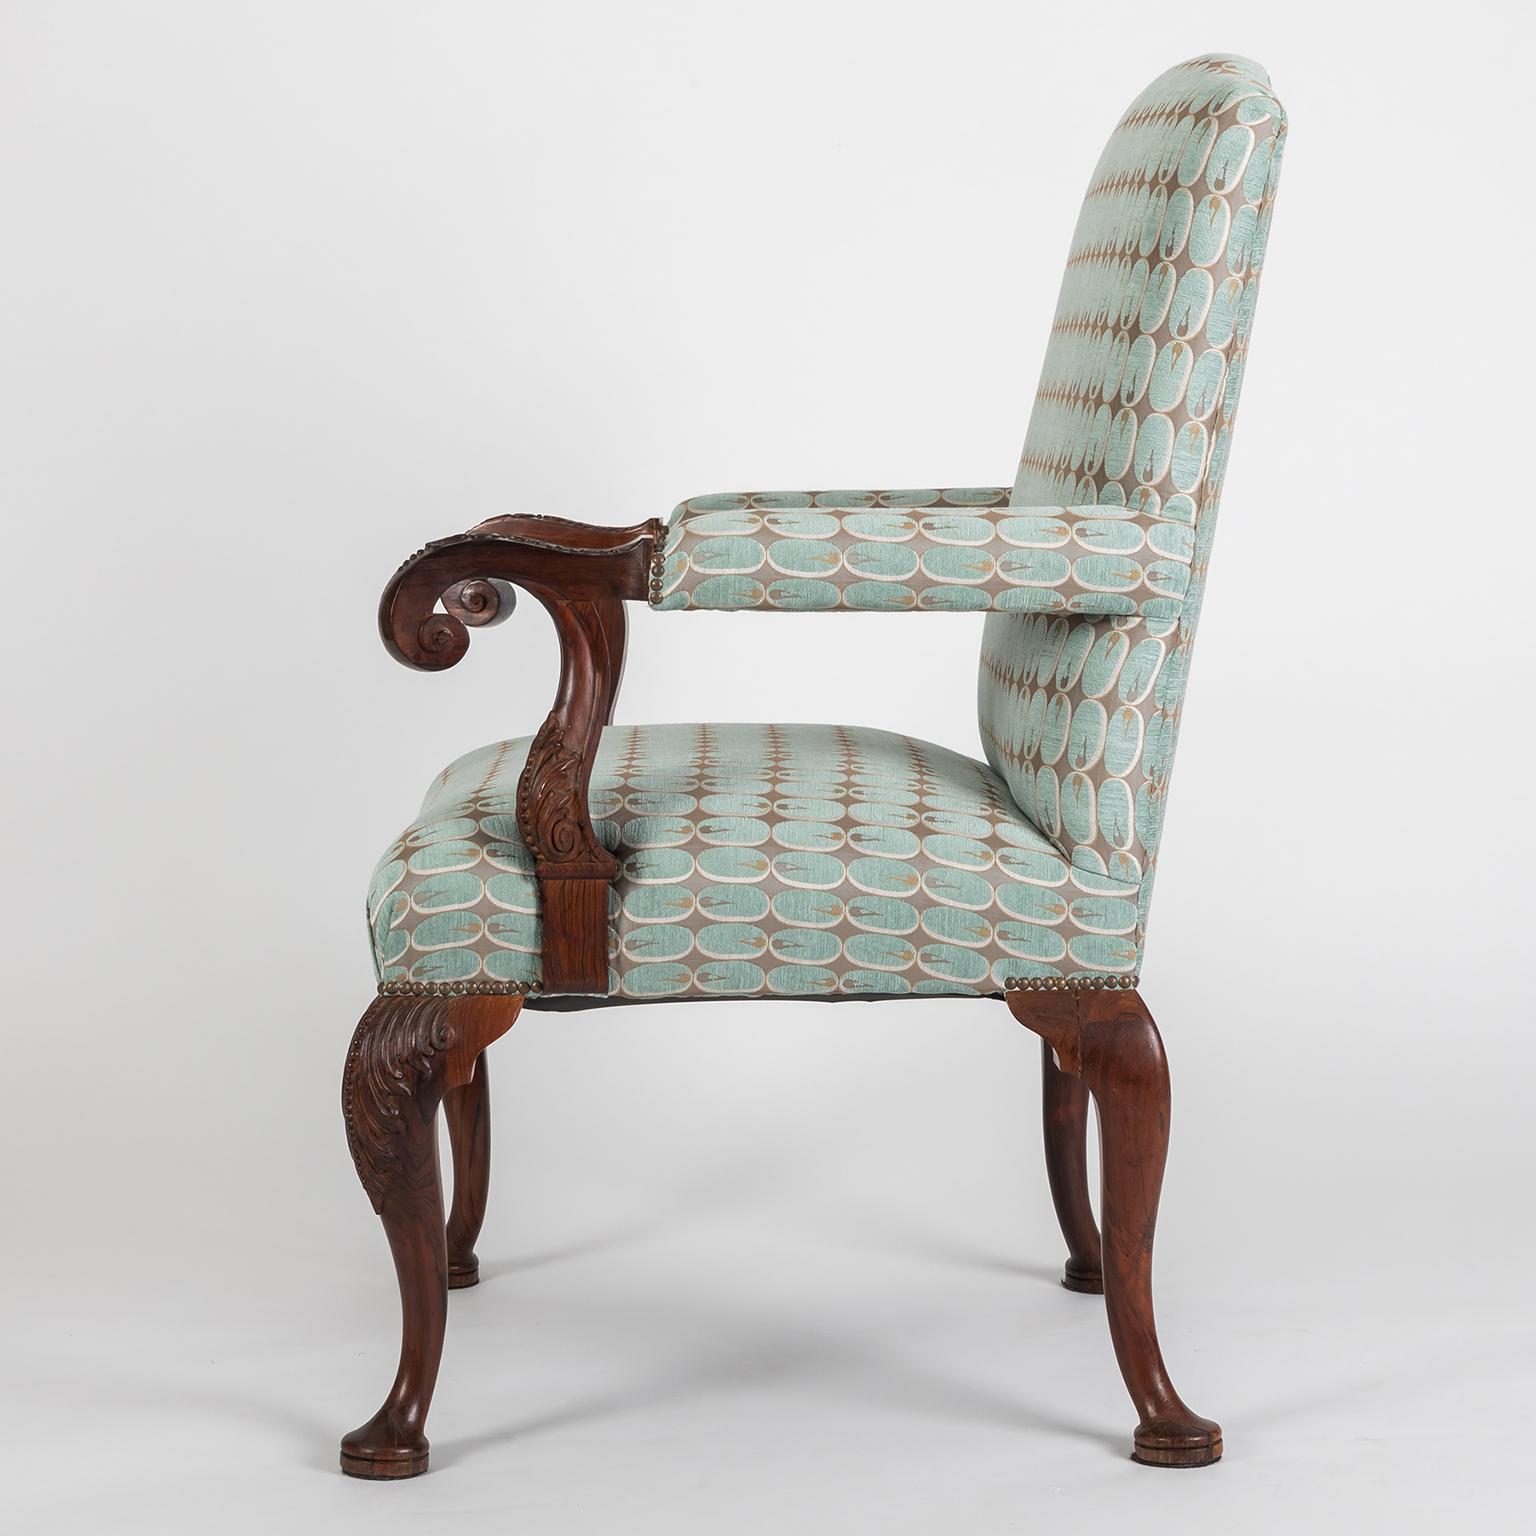 Hand-Carved Hand Carved English Georgian Style Armchair in Kravet Fabric, Late 19th Century For Sale